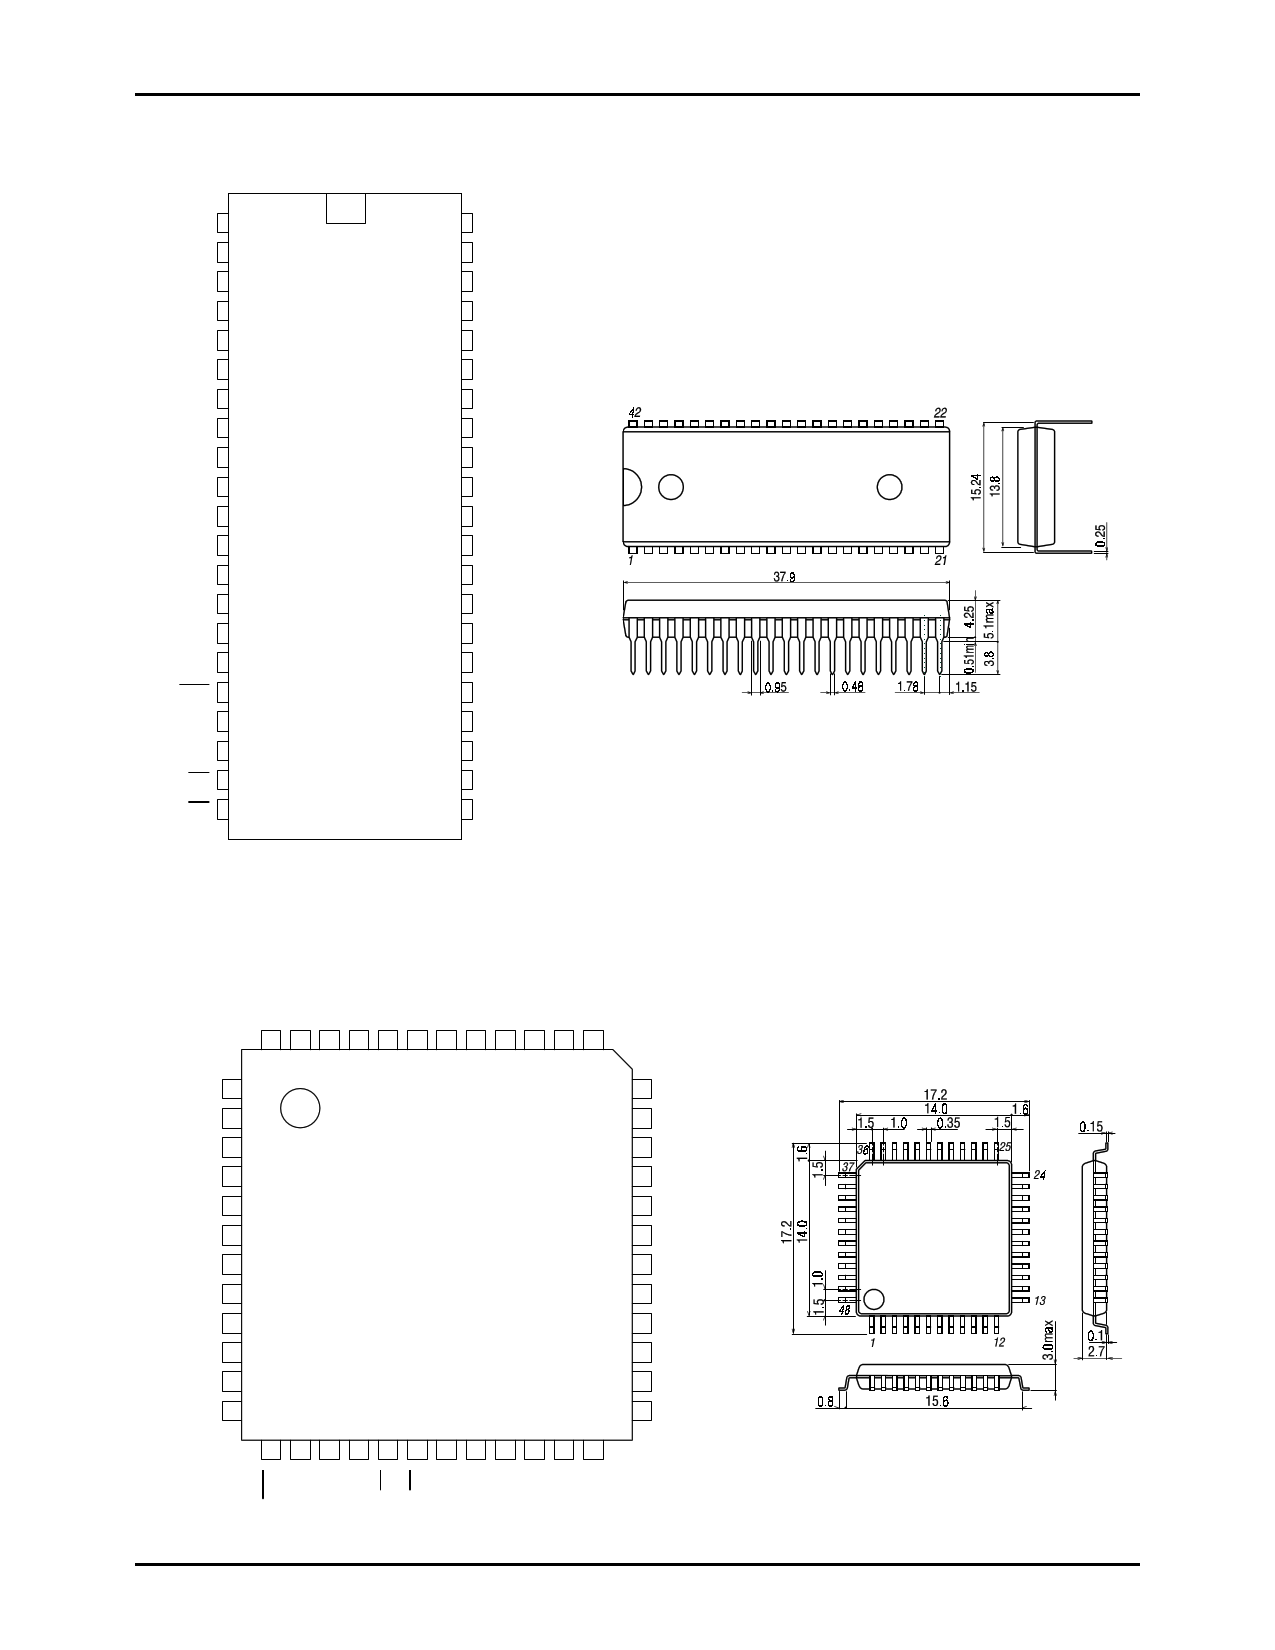 LC863348A Datasheet, Funktion